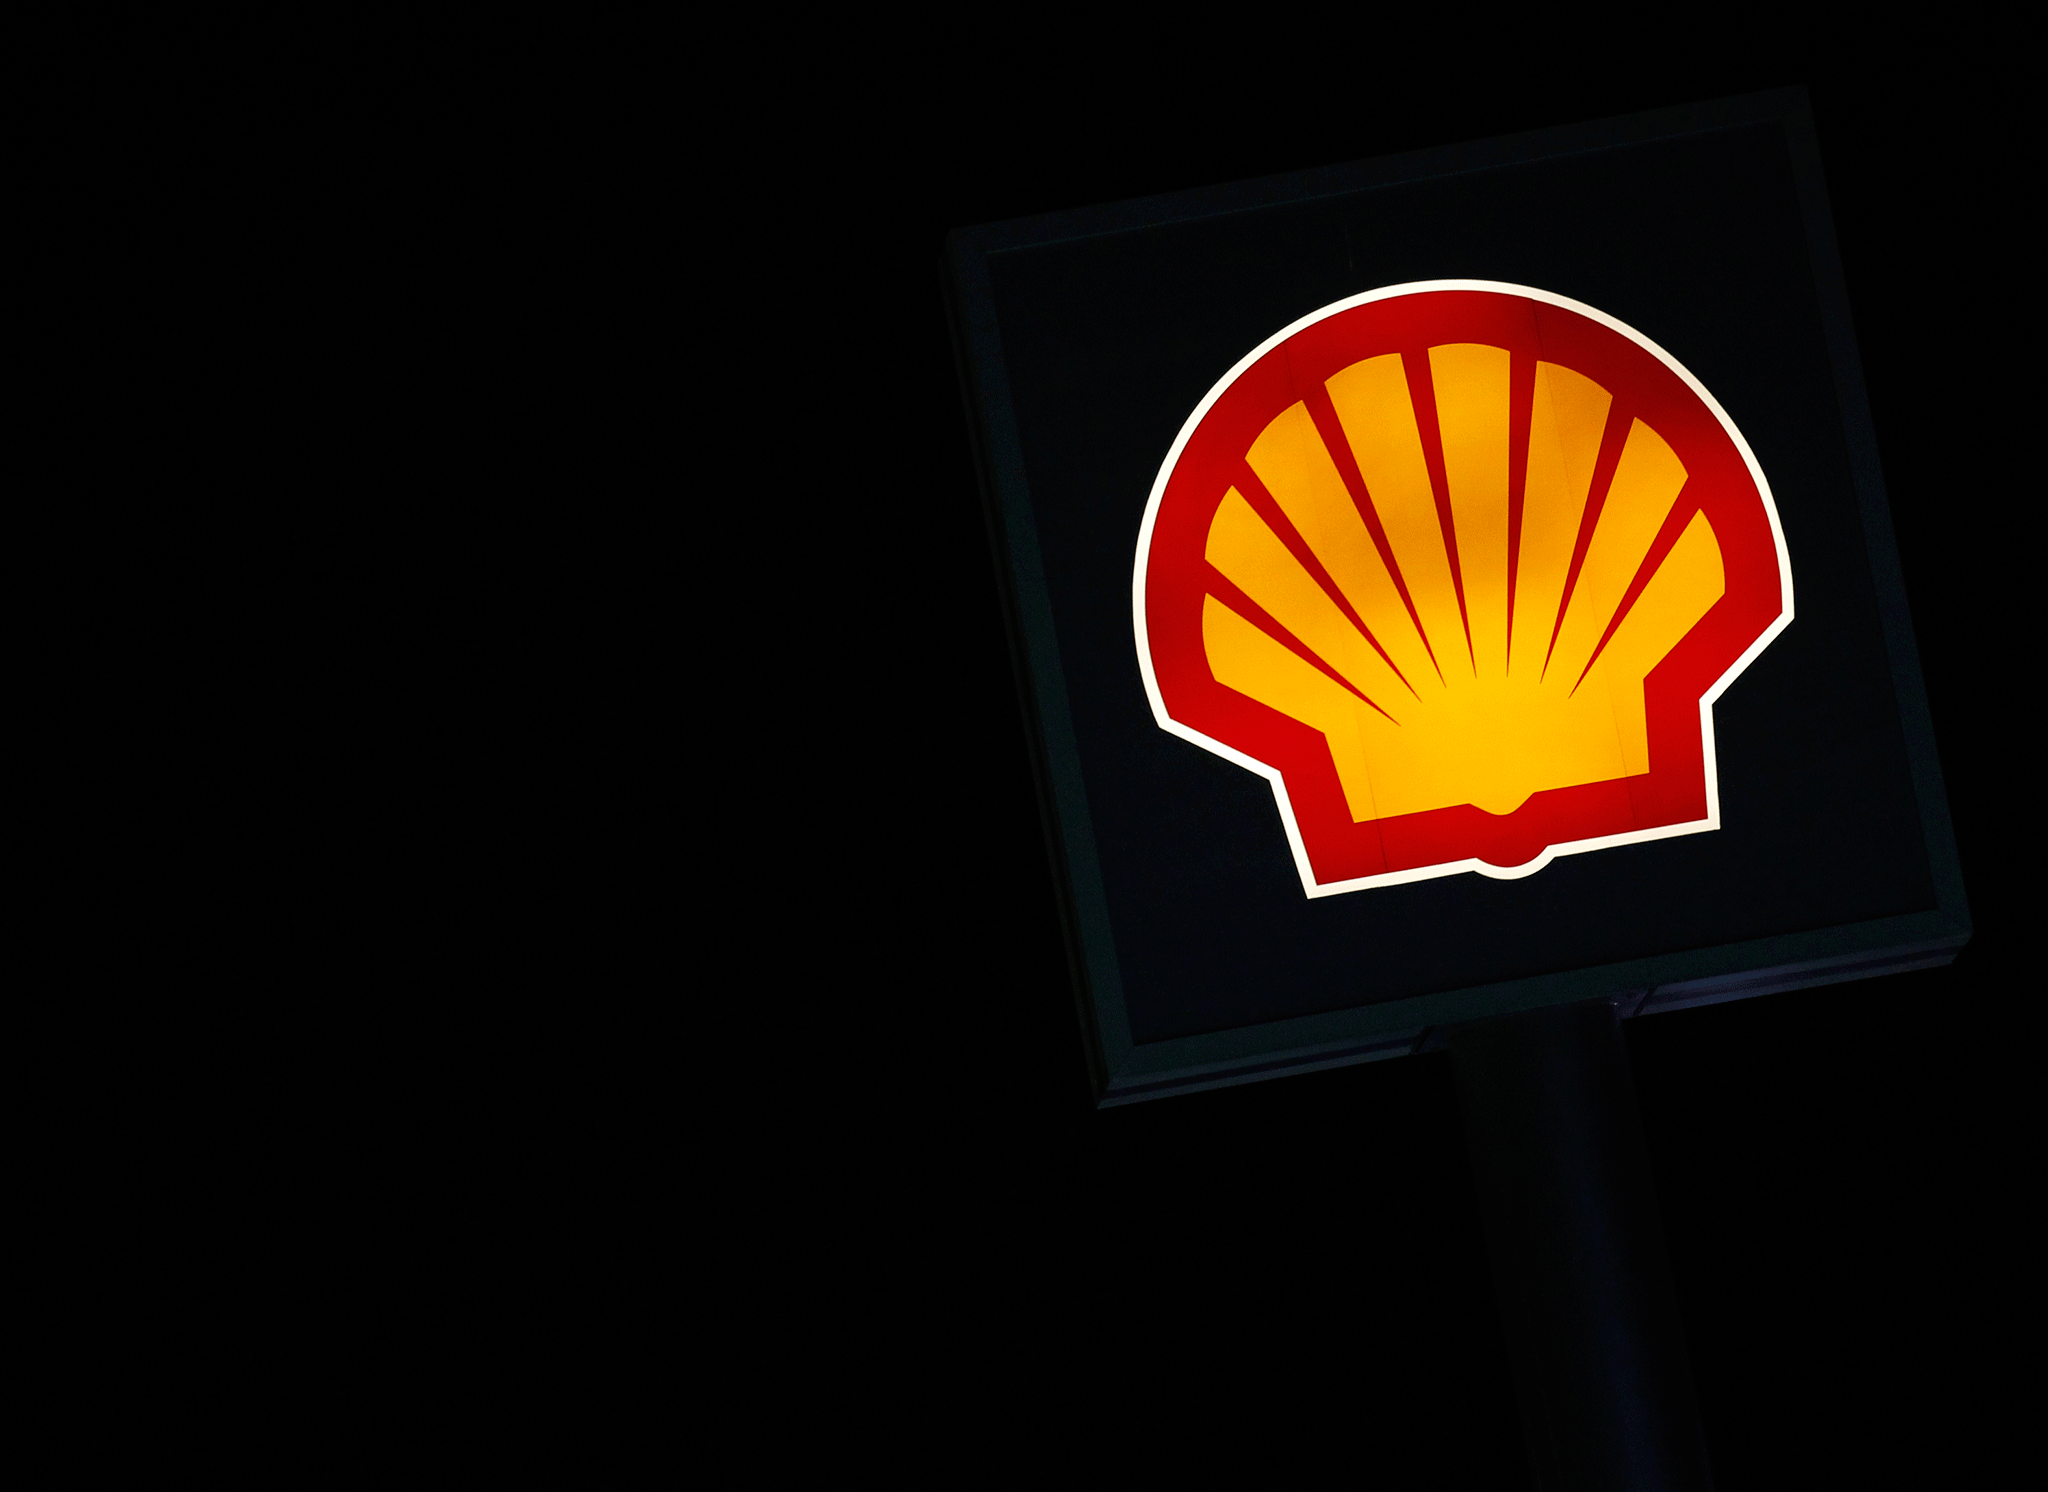 Shell, the oldest energy company in Africa’s biggest oil producer, operates a joint venture with the government that pumps more than a third of the nation’s crude, the state’s main source of revenue.